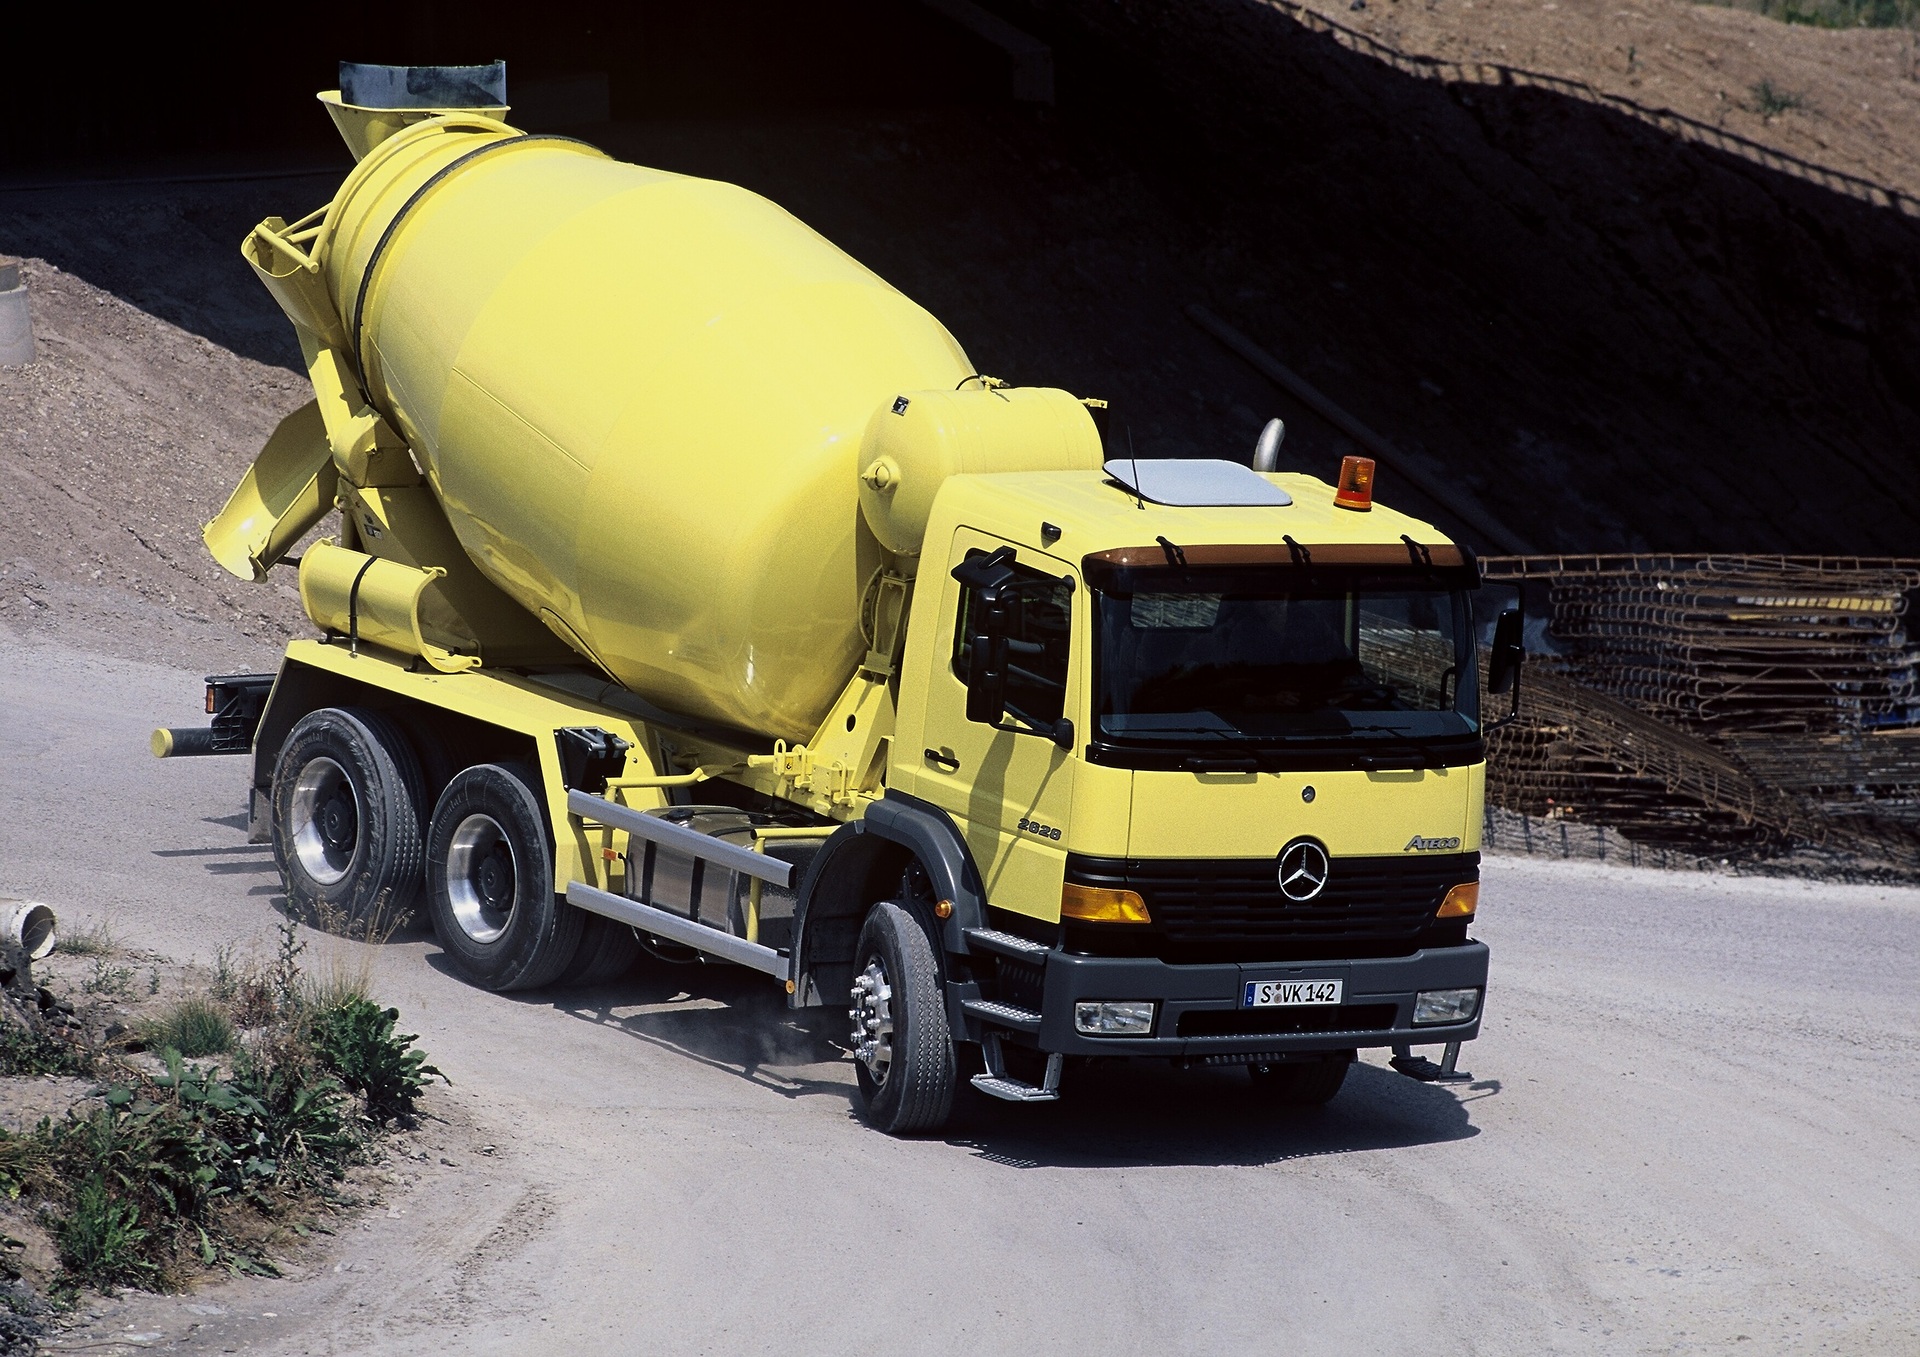 25th anniversary of the Mercedes-Benz Atego: A truck as versatile as the transport tasks in distribution haulage